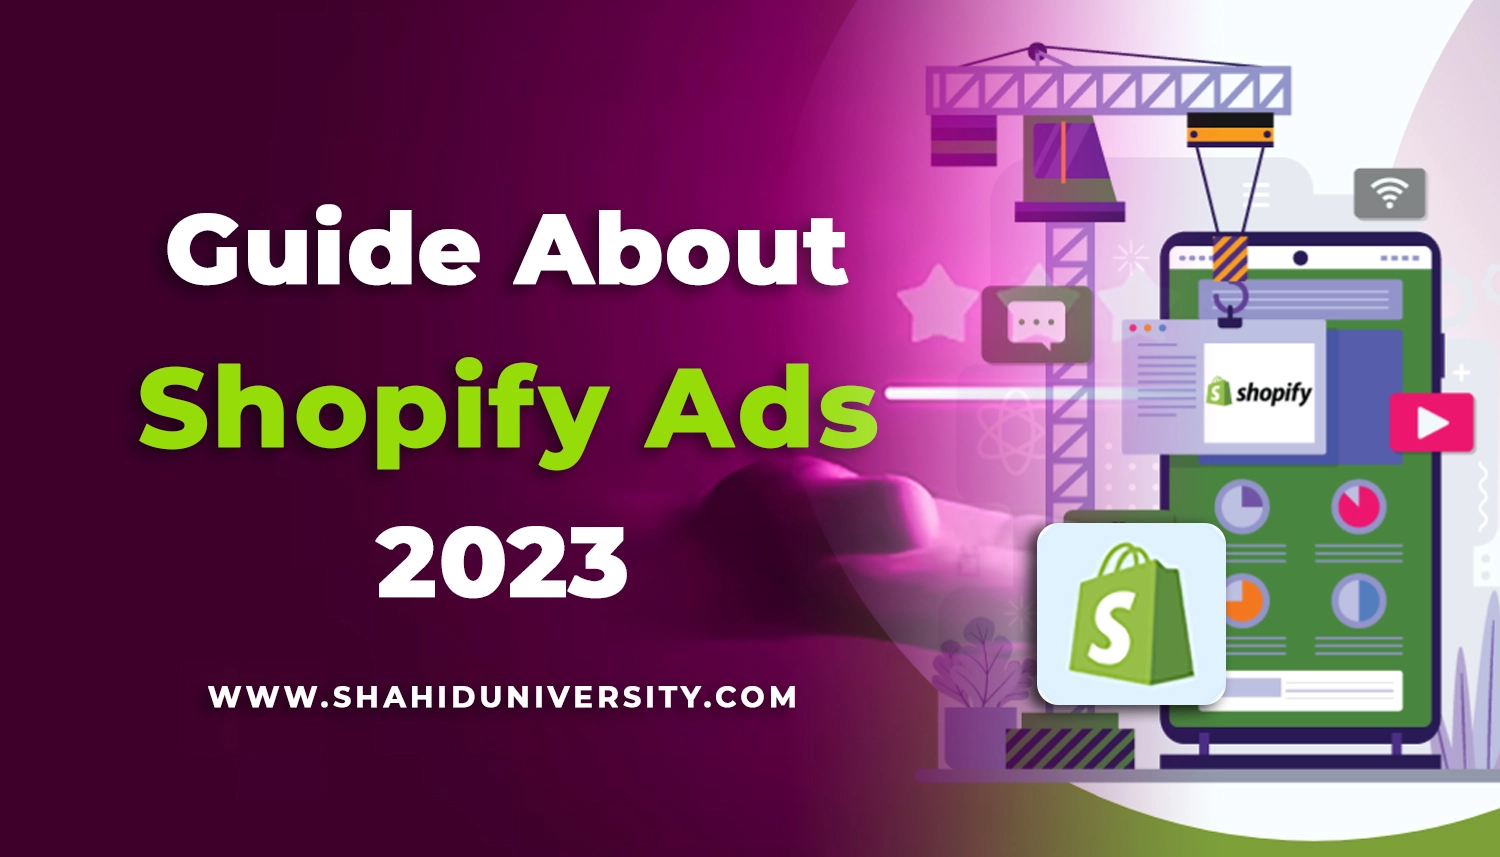 Complete Guide about Shopify Ads and Working